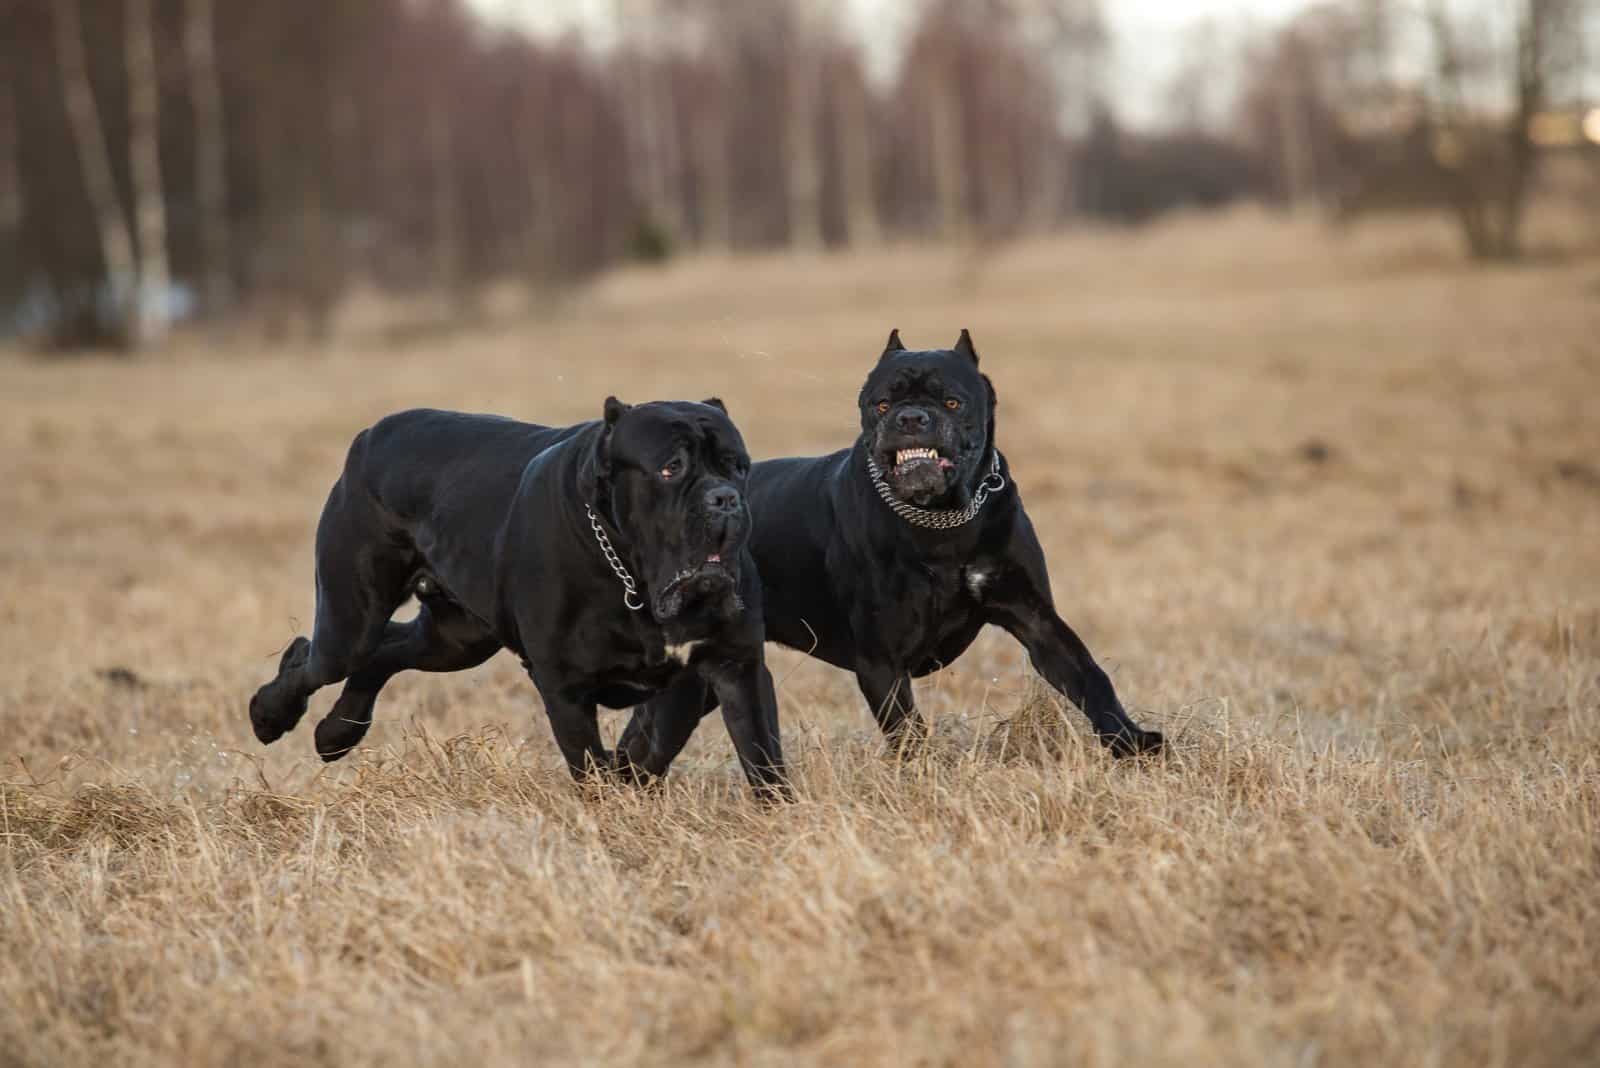 Cane Corso dogs playing in meadow